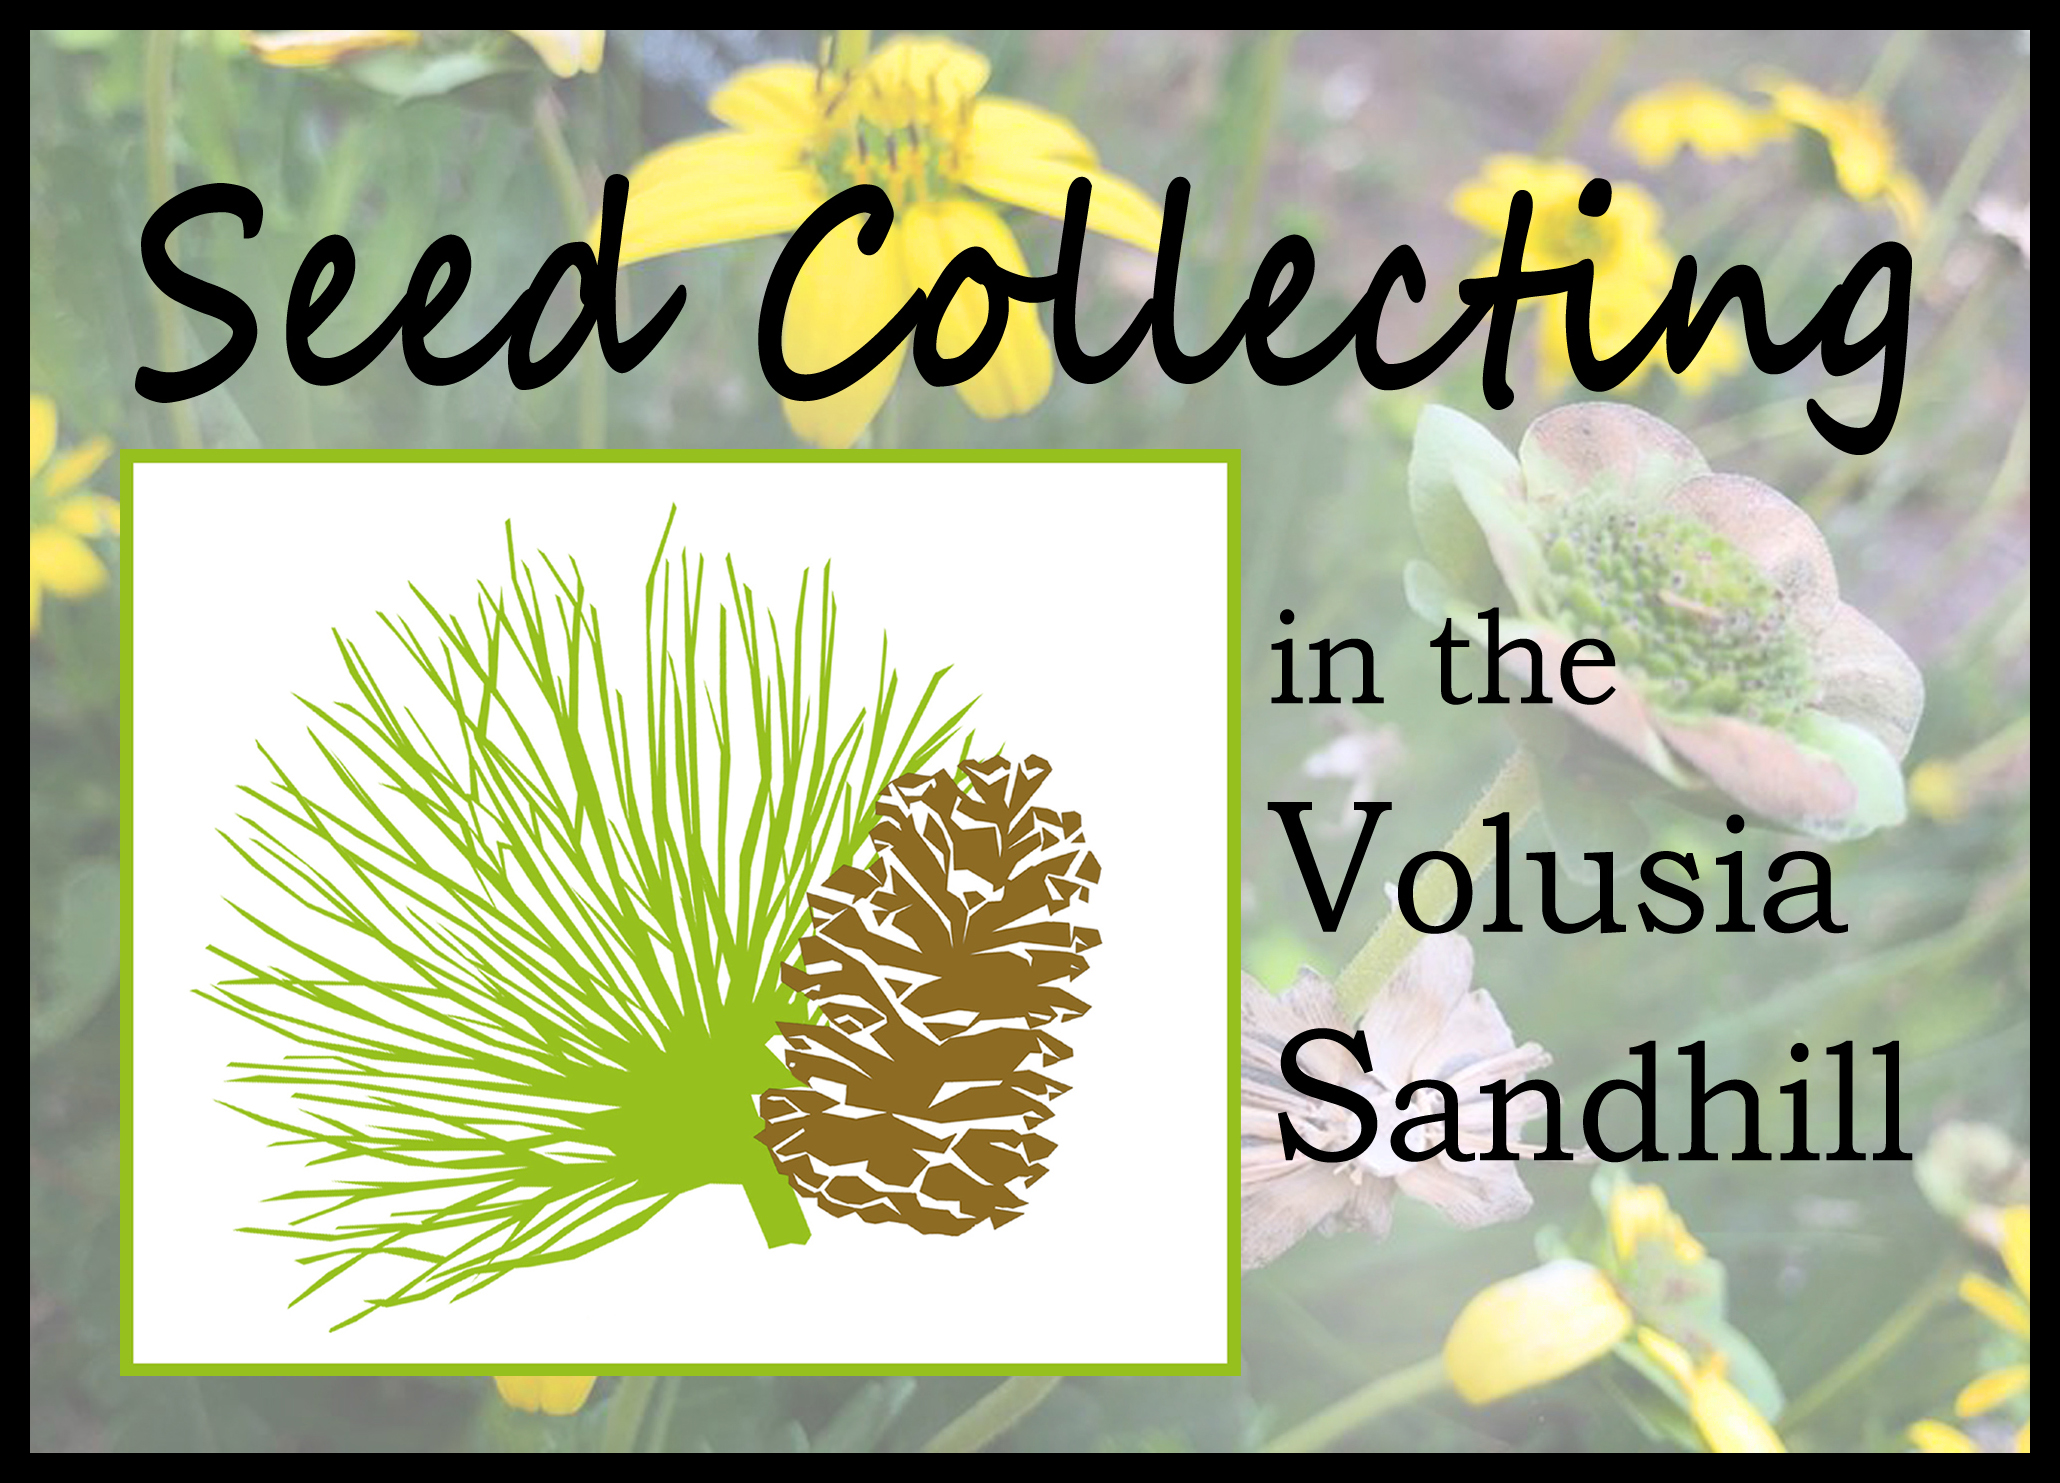 Seed Collecting in the Volusia Sandhill